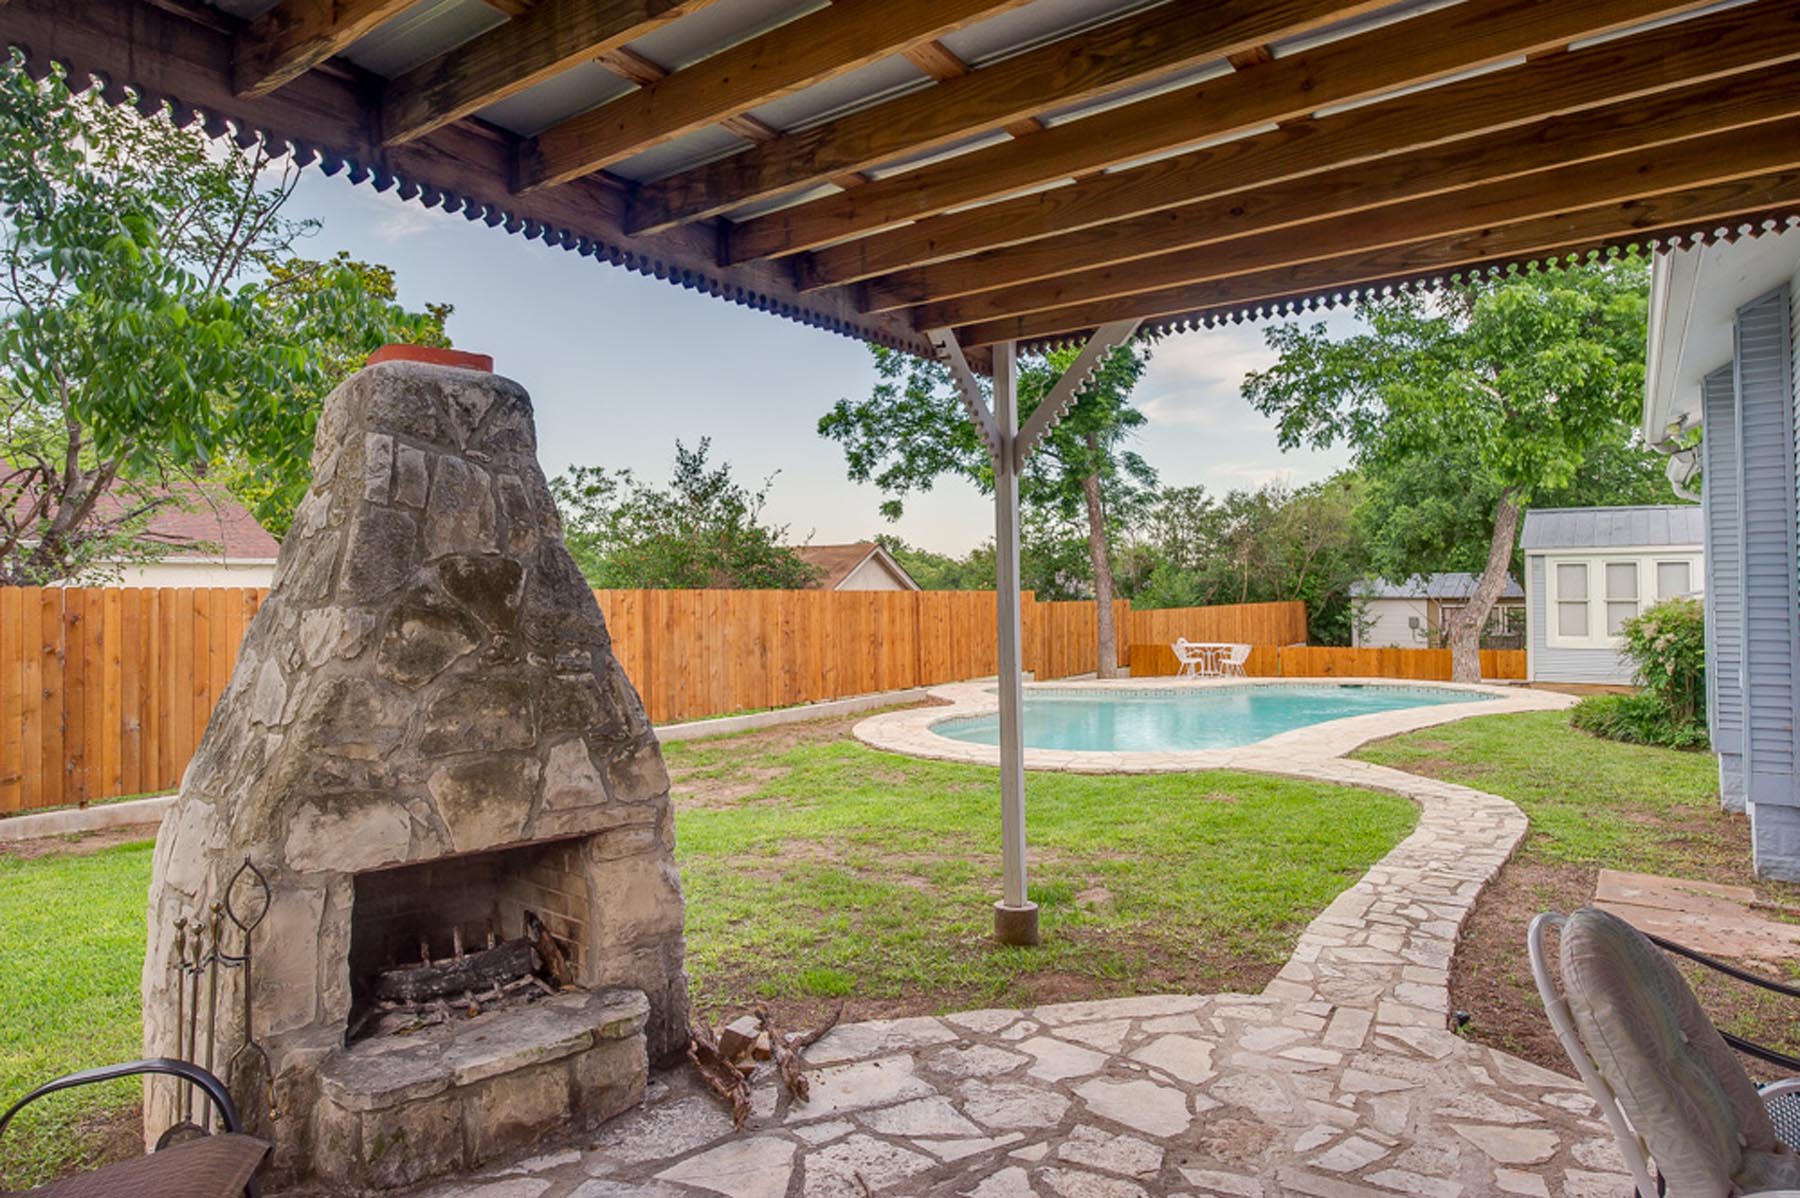 Outdoor pool and fireplace of Blue House.